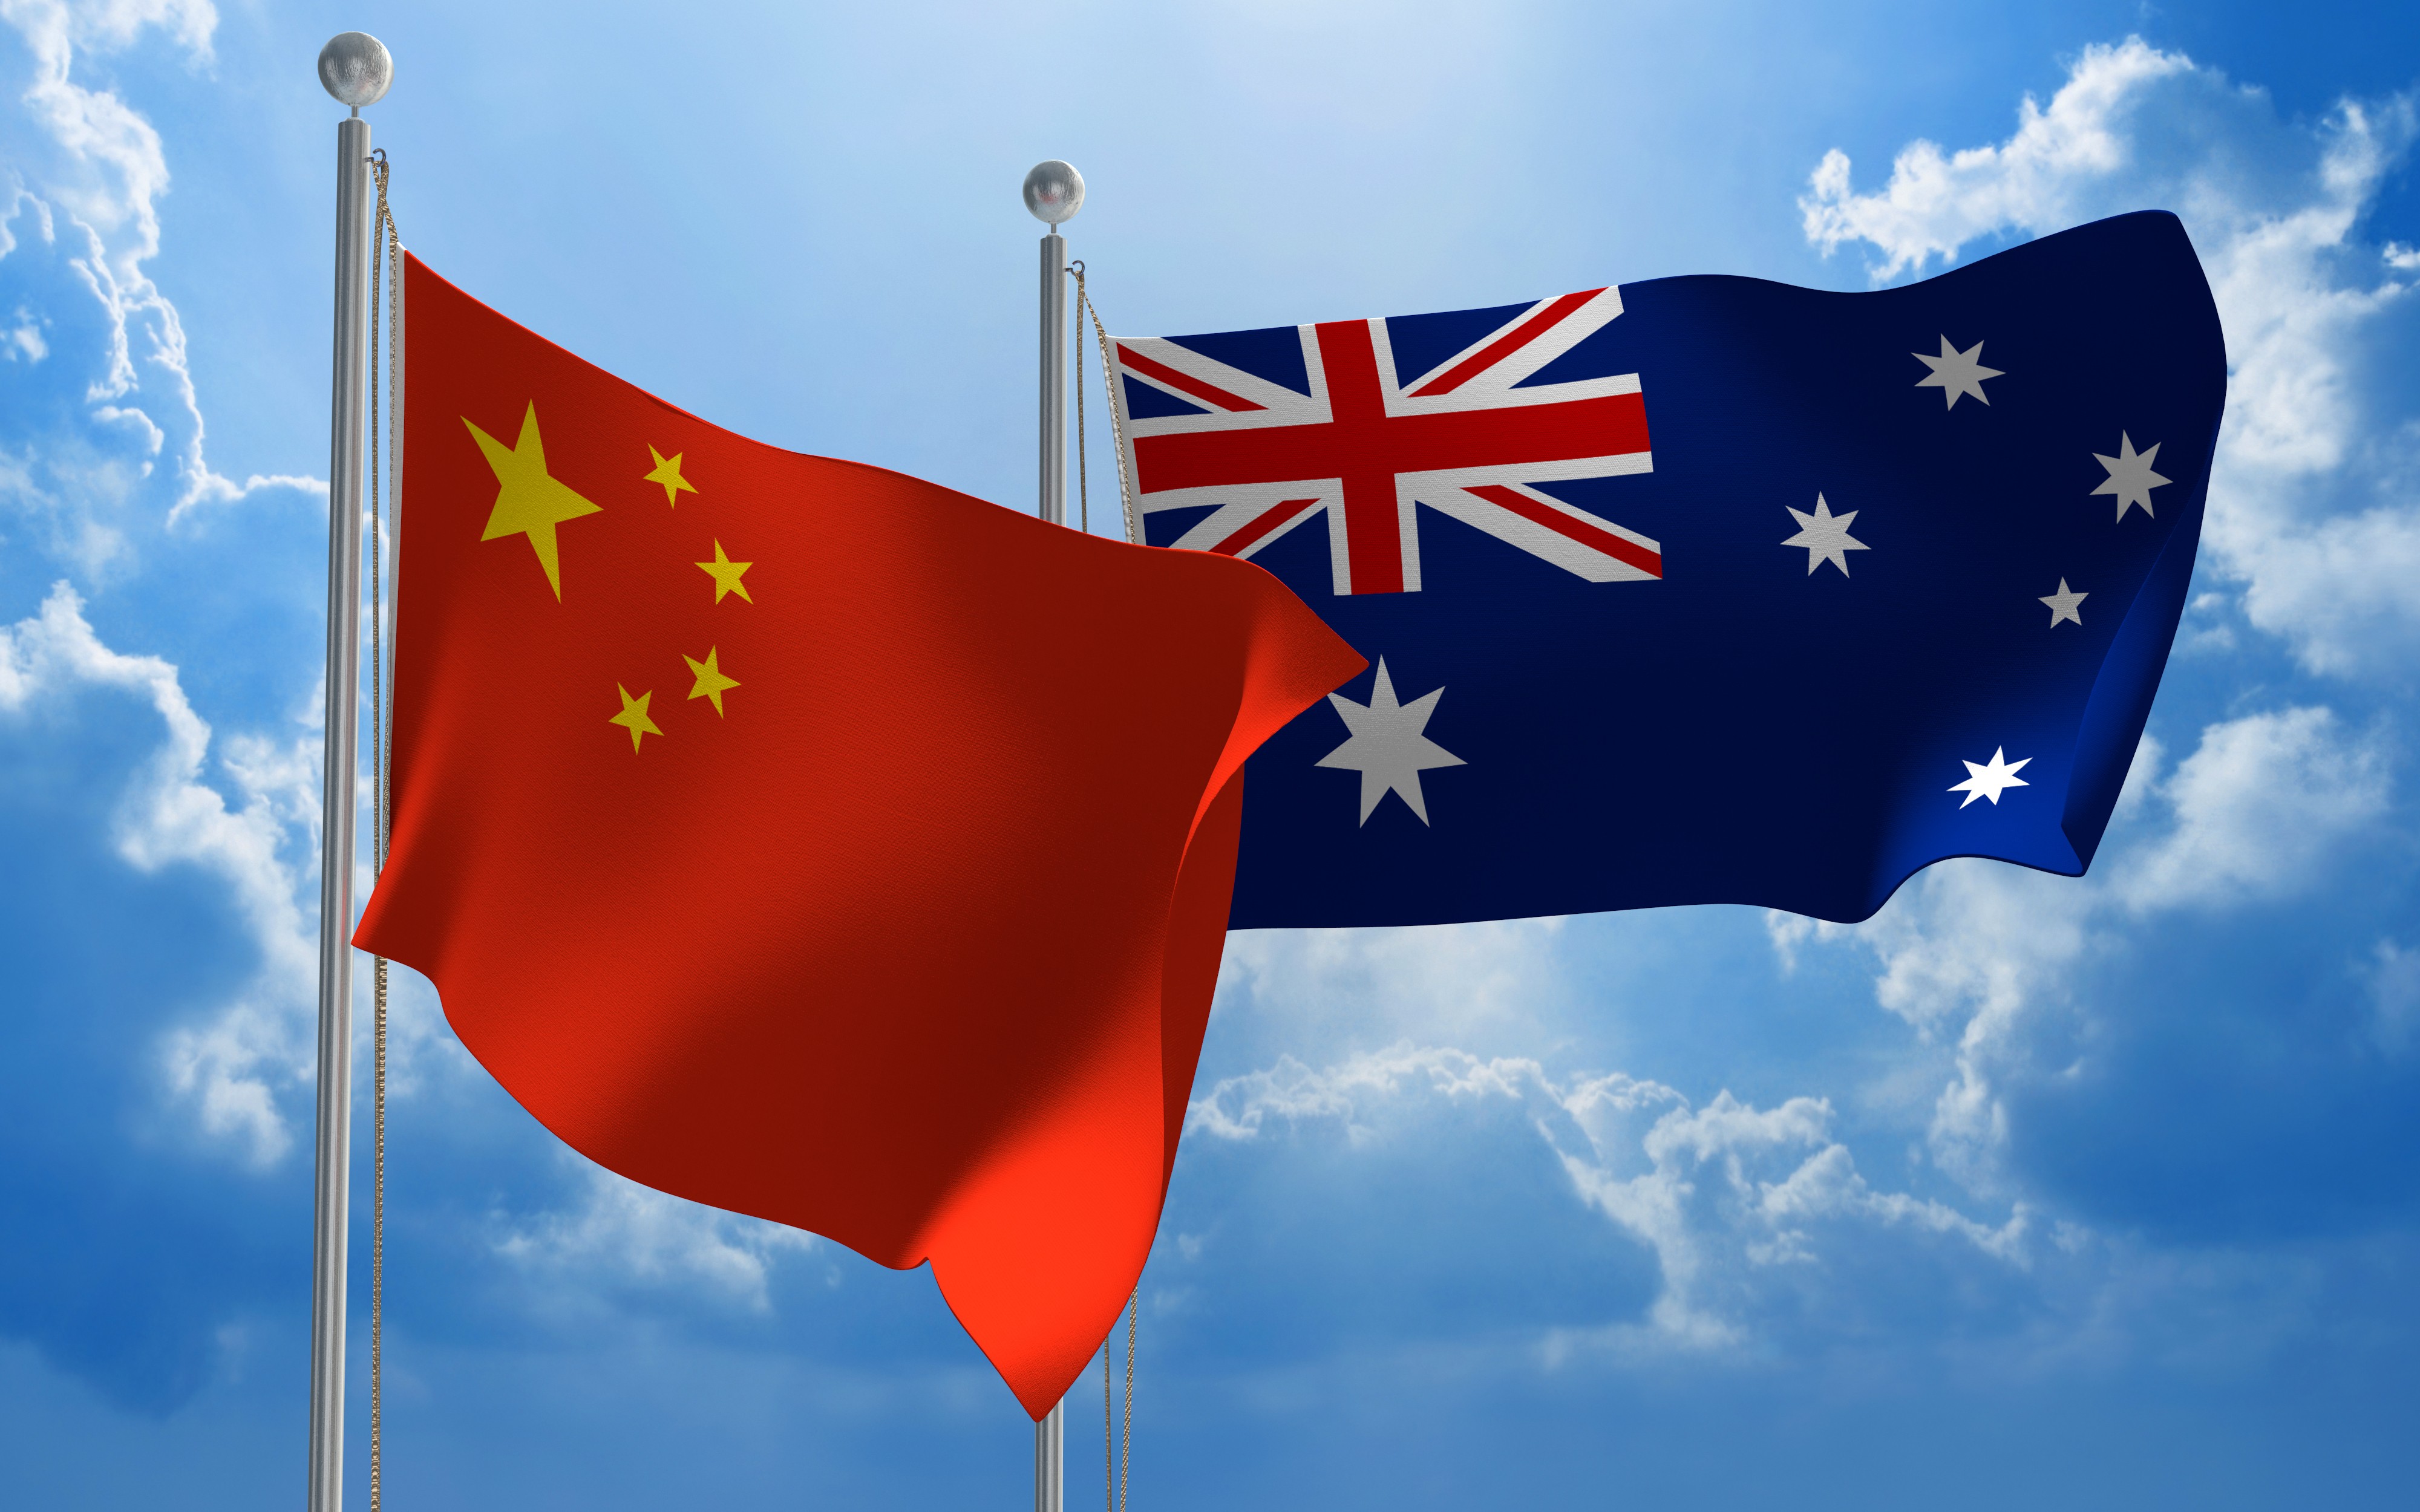 China’s influence in Australian politics comes under scrutiny in Silent Invasion by Clive Hamilton.